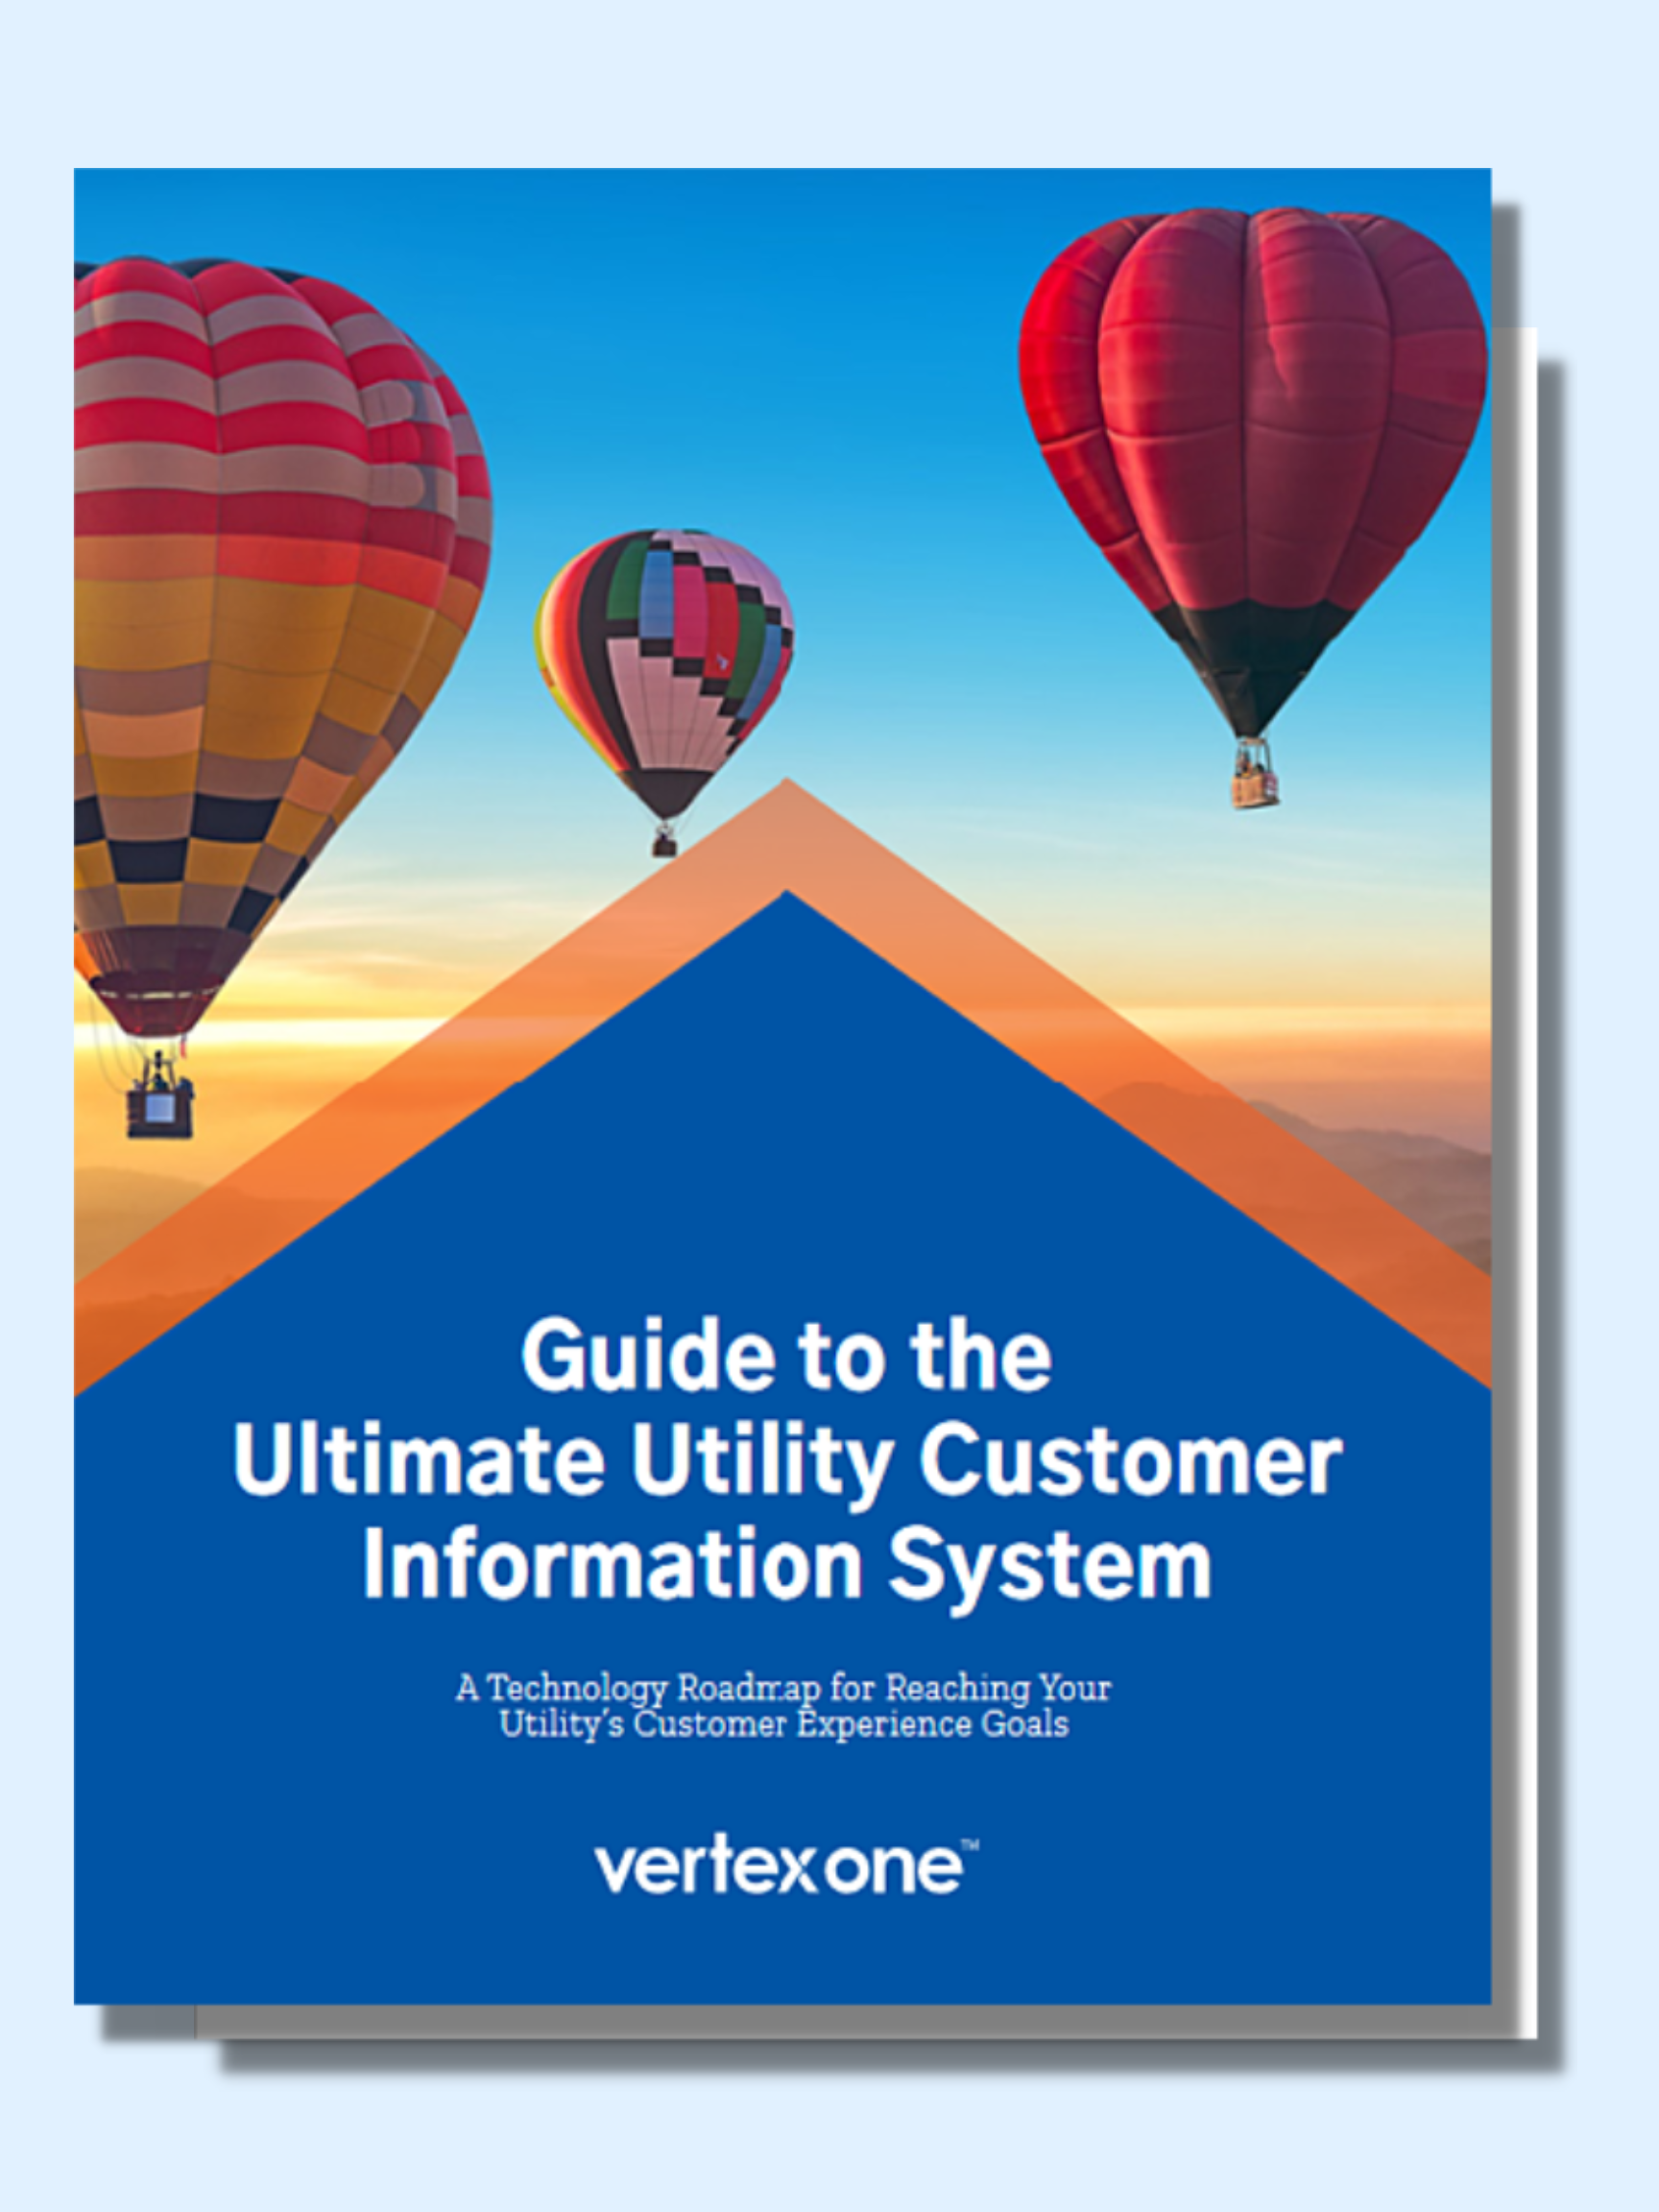 Download the Ultimate Utility Customer Information System (CIS) Guide